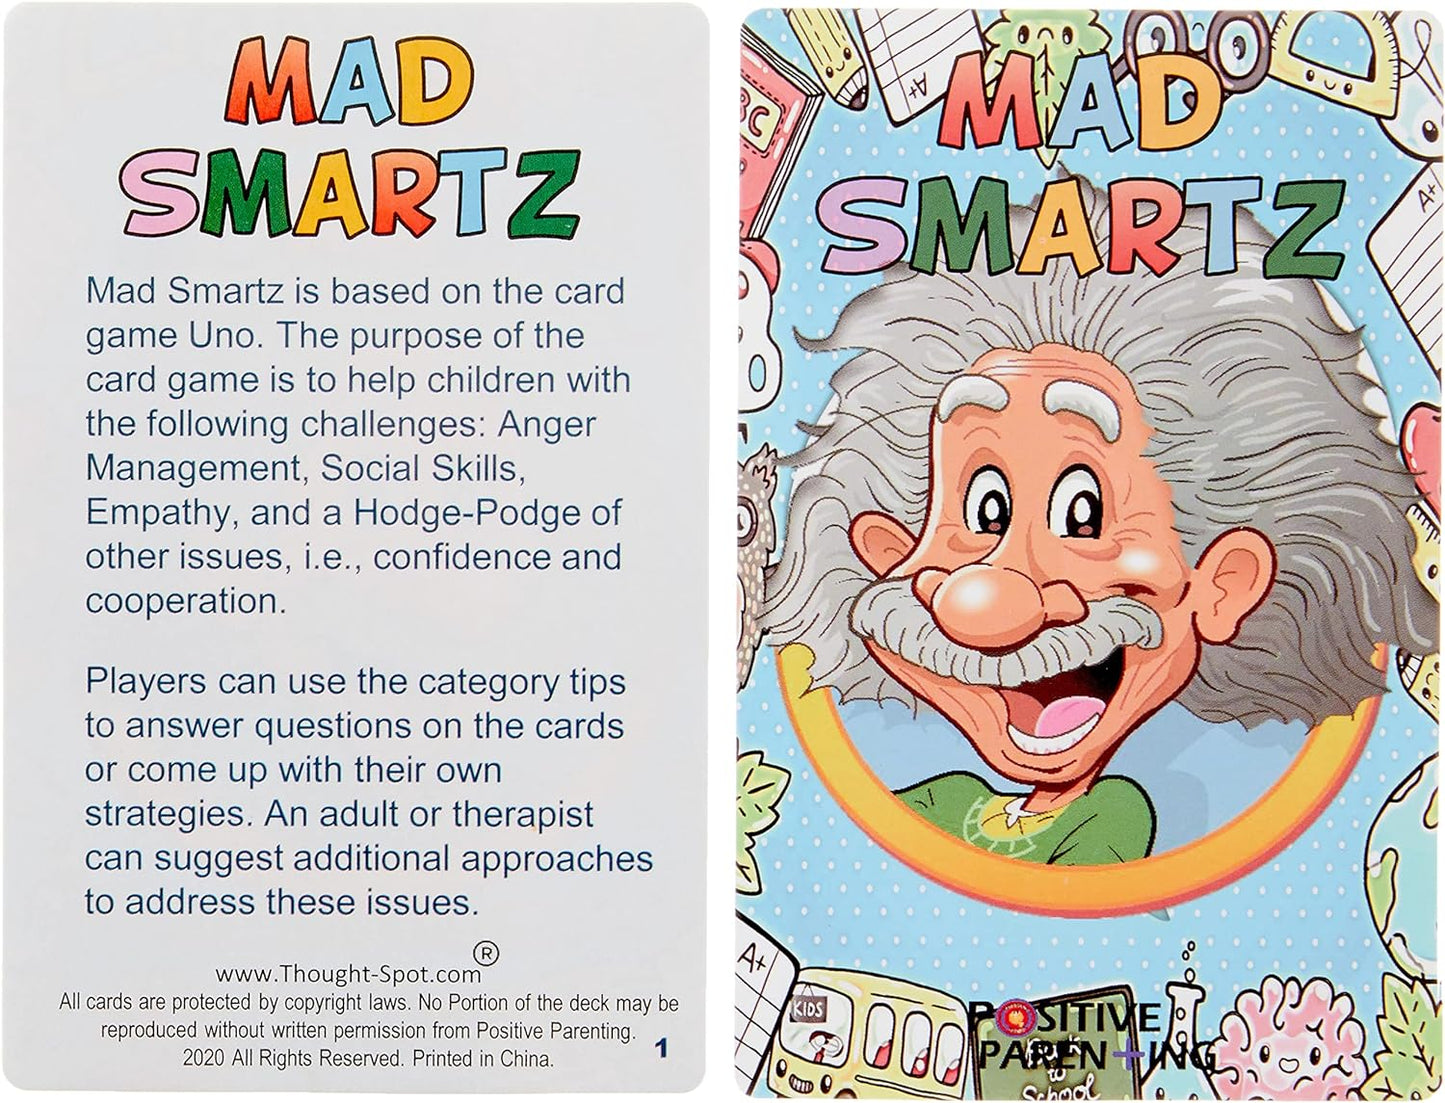 MAD SMARTZ an Interpersonal Skills Card Game